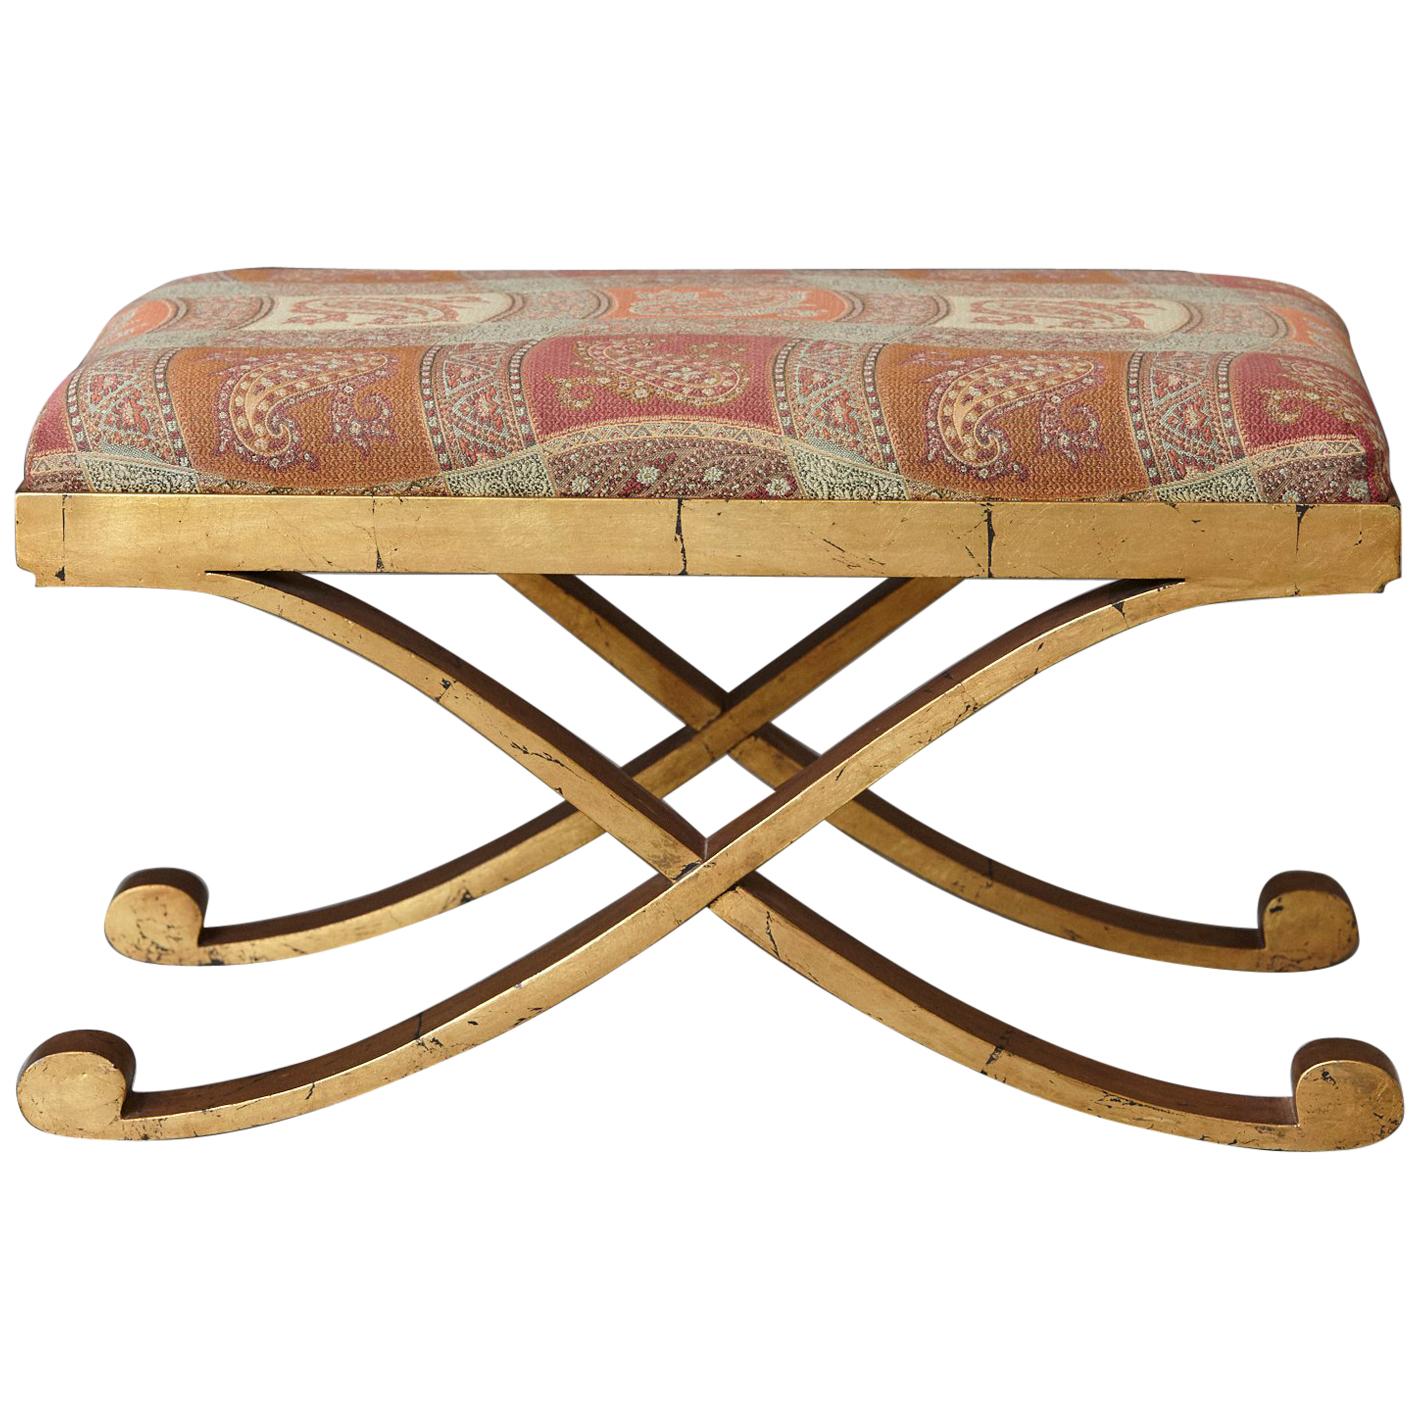 Gild Patinated Metal Bench with Cross Legs Upholstered in Paisley Fabric